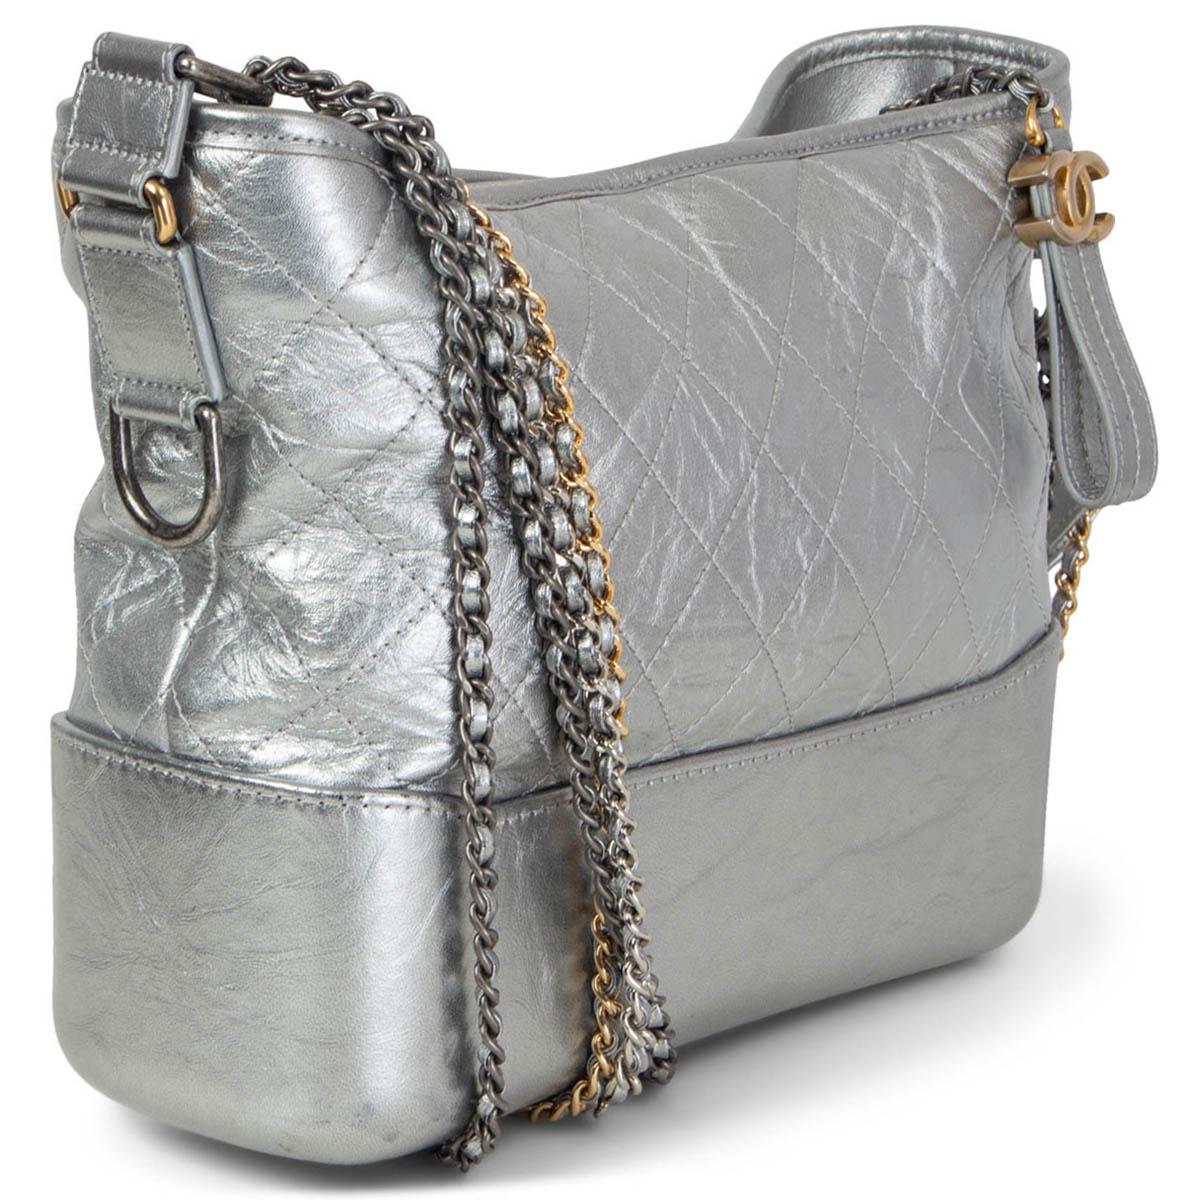 100% authentic Chanel Gabrielle Medium Hobo Bag in metallic silver aged calfskin featuring doubel chain shoulder-strap in gold-tone, silver-tone & ruthenium-finish metal. Opens with a CC zipper on top and is lined in red grosgrain fabric with one